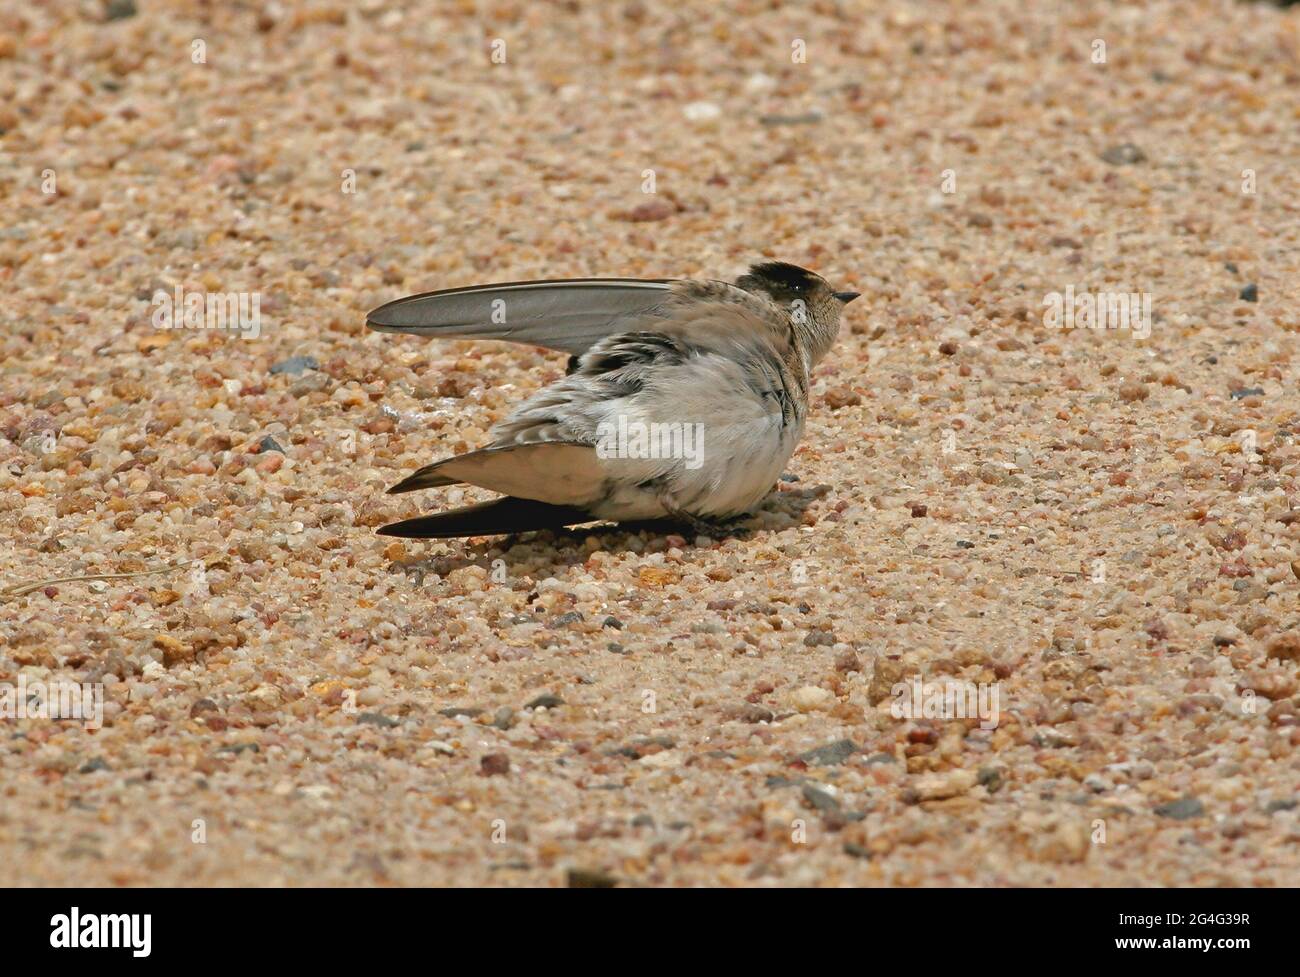 Tree Martin (Petrochelidon nigricans neglecta) adult sunning on a dirt road south-east Queensland, Australia      January Stock Photo